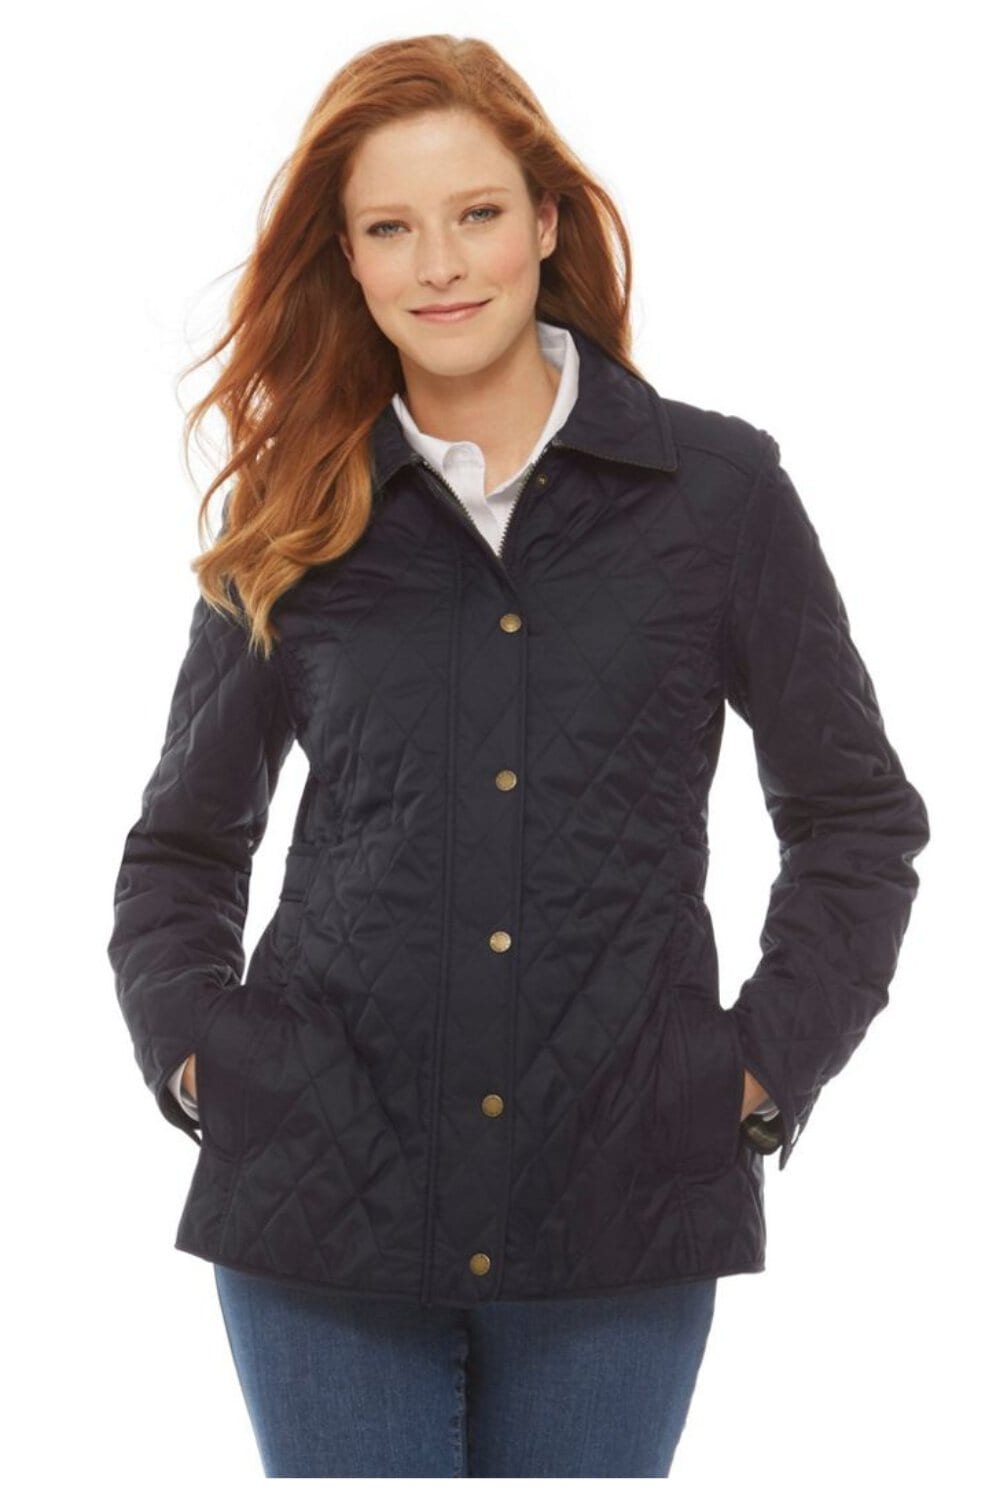 L.L.Bean Quilted Riding Jacket